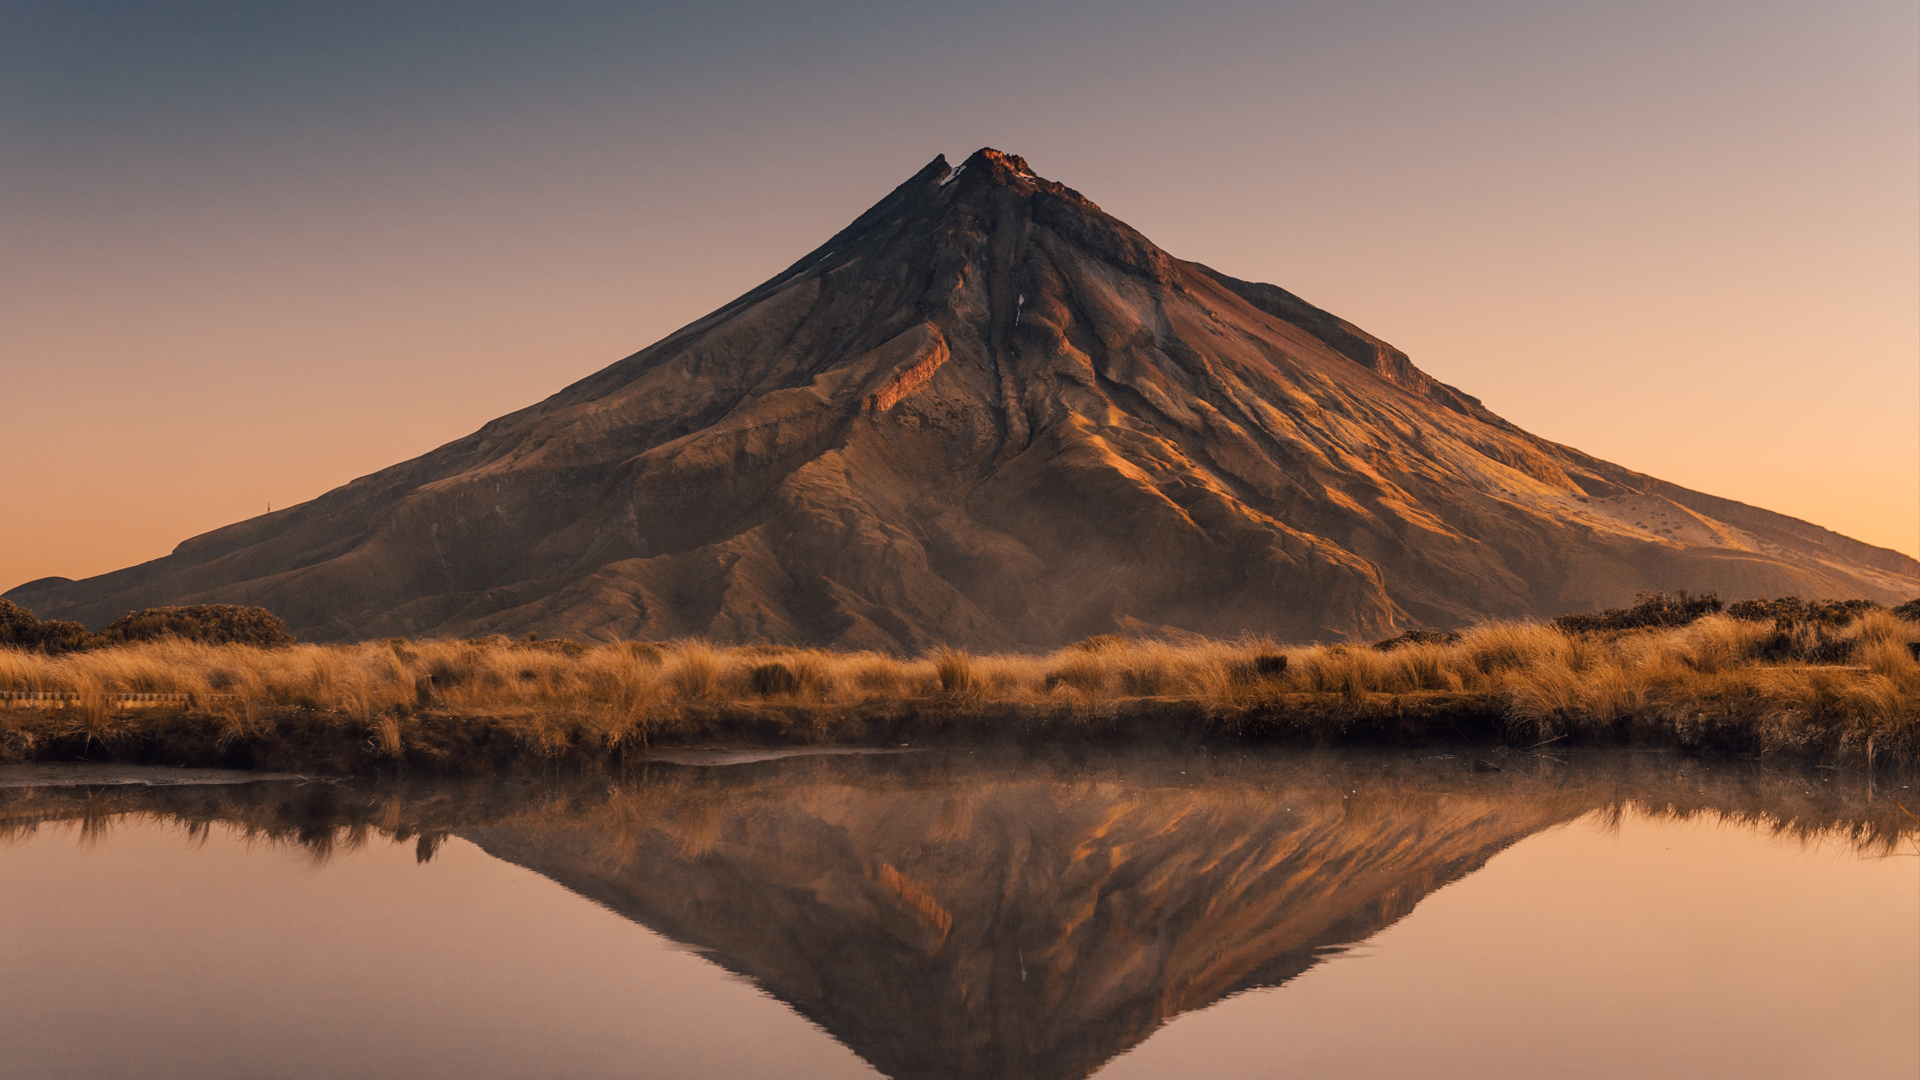 A mountain reflected in a lake.